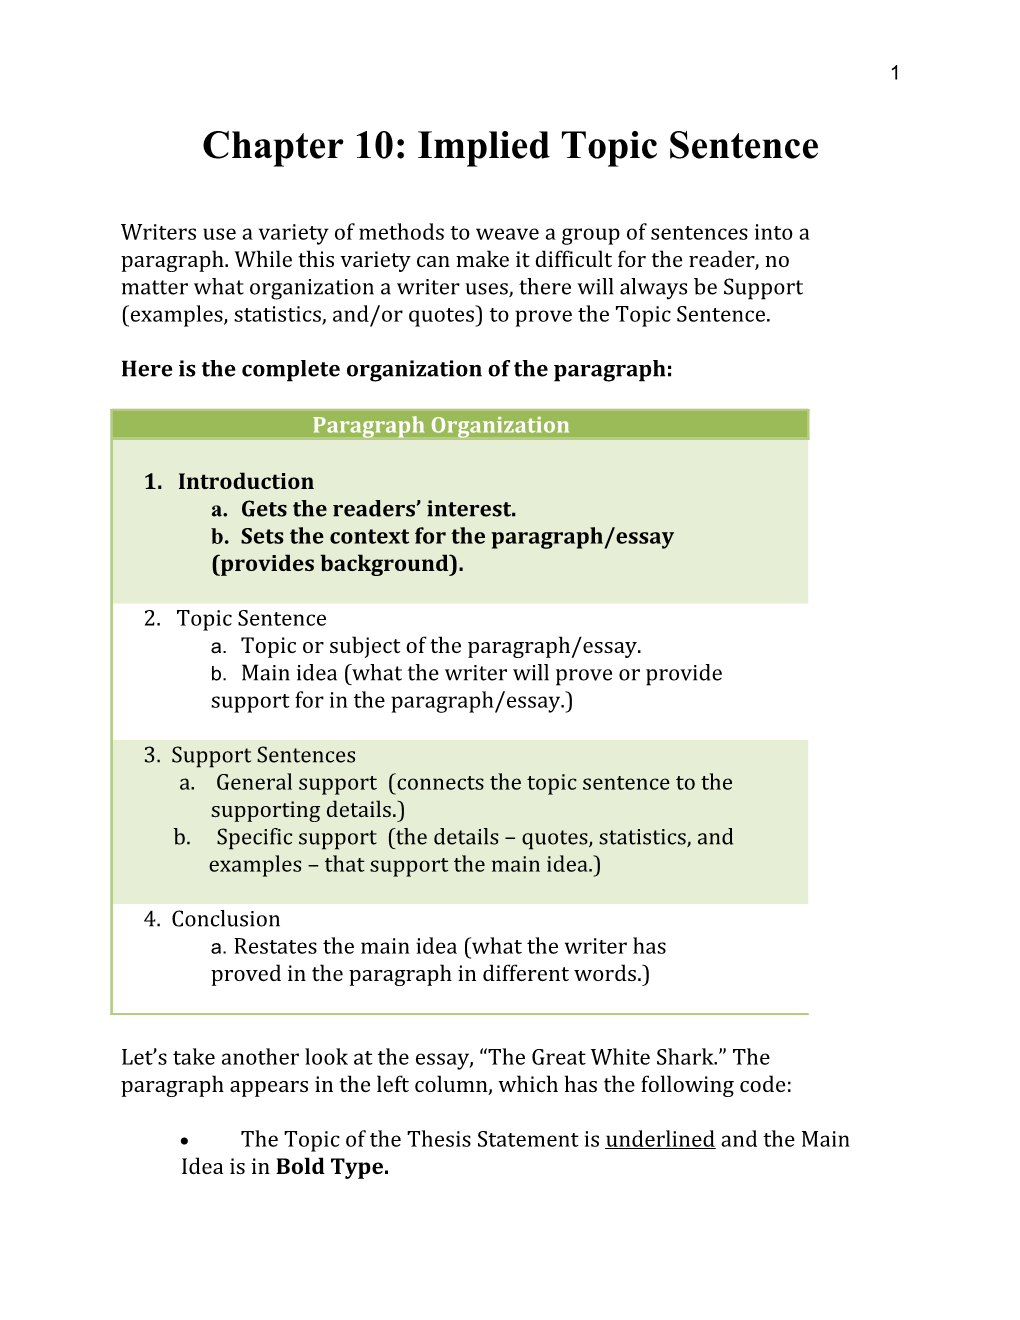 Chapter 10: Implied Topic Sentence